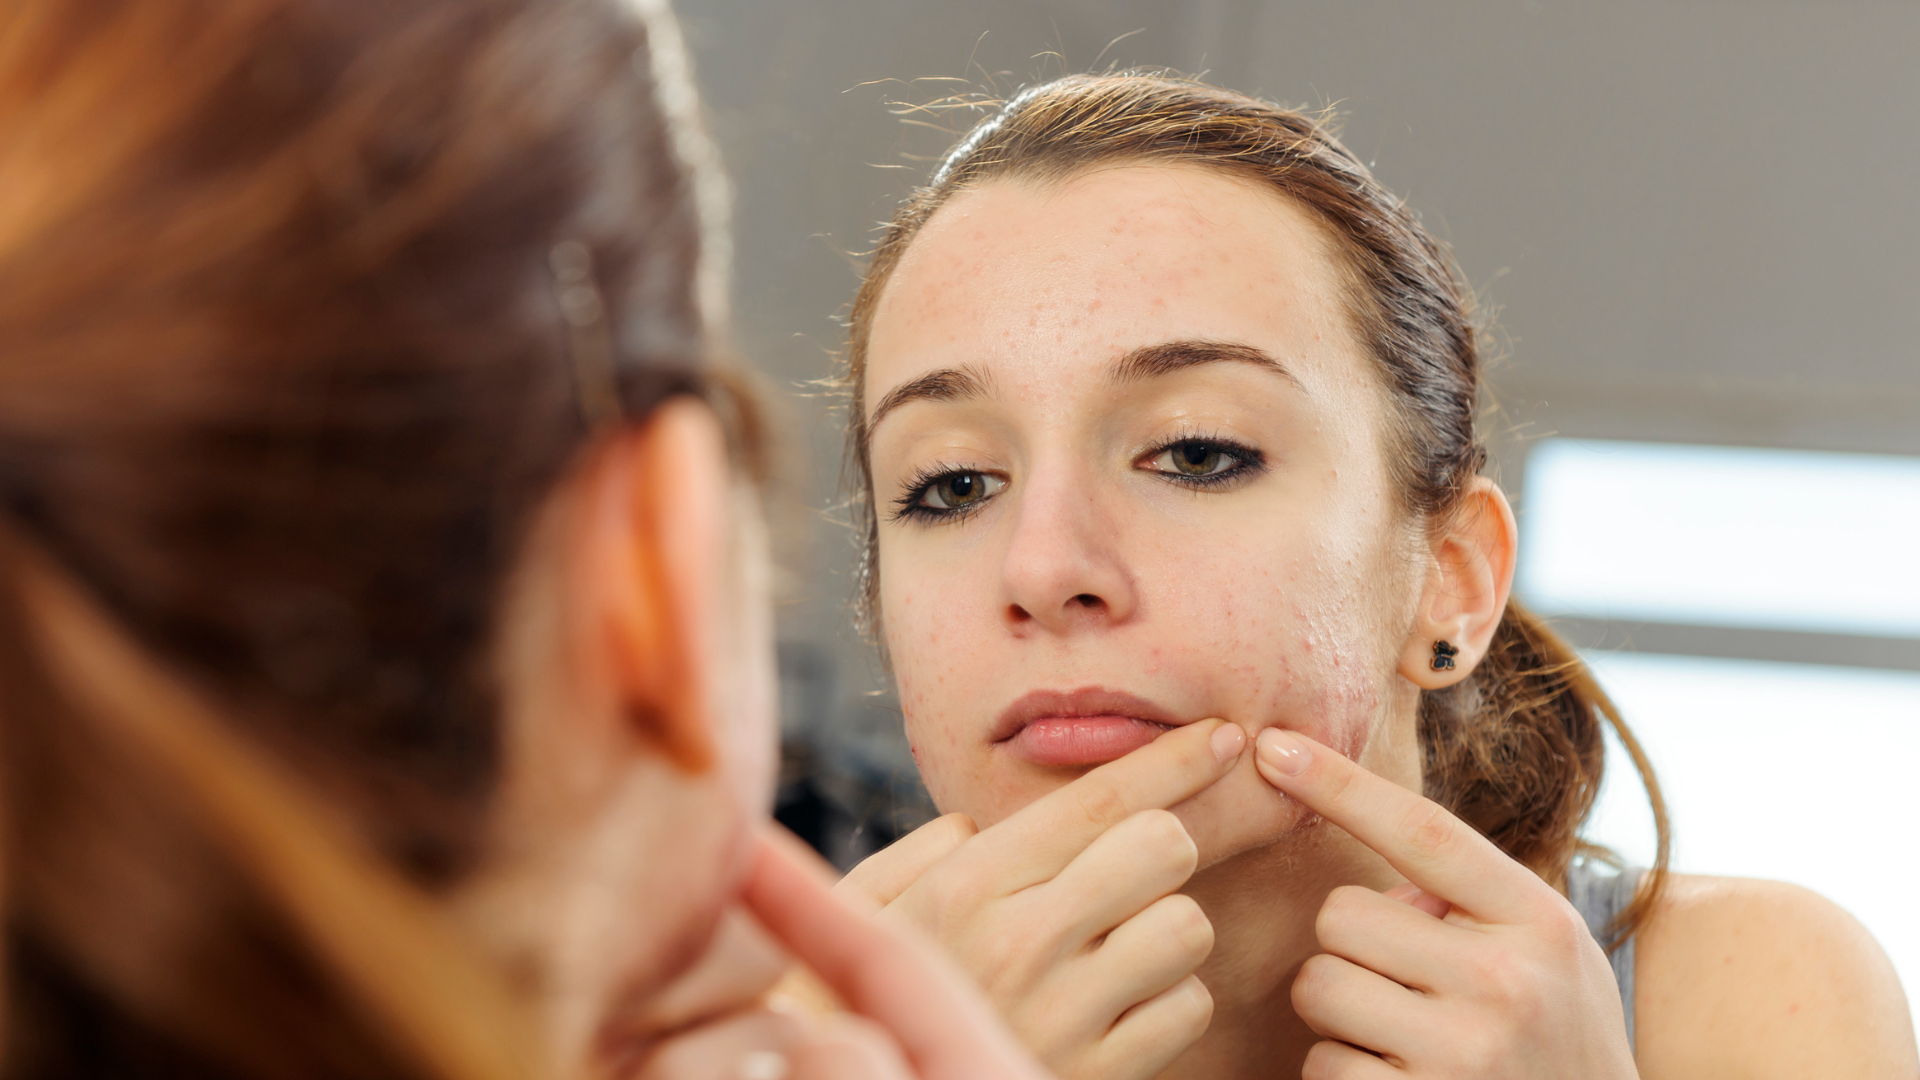 Is acne genetically inherited?